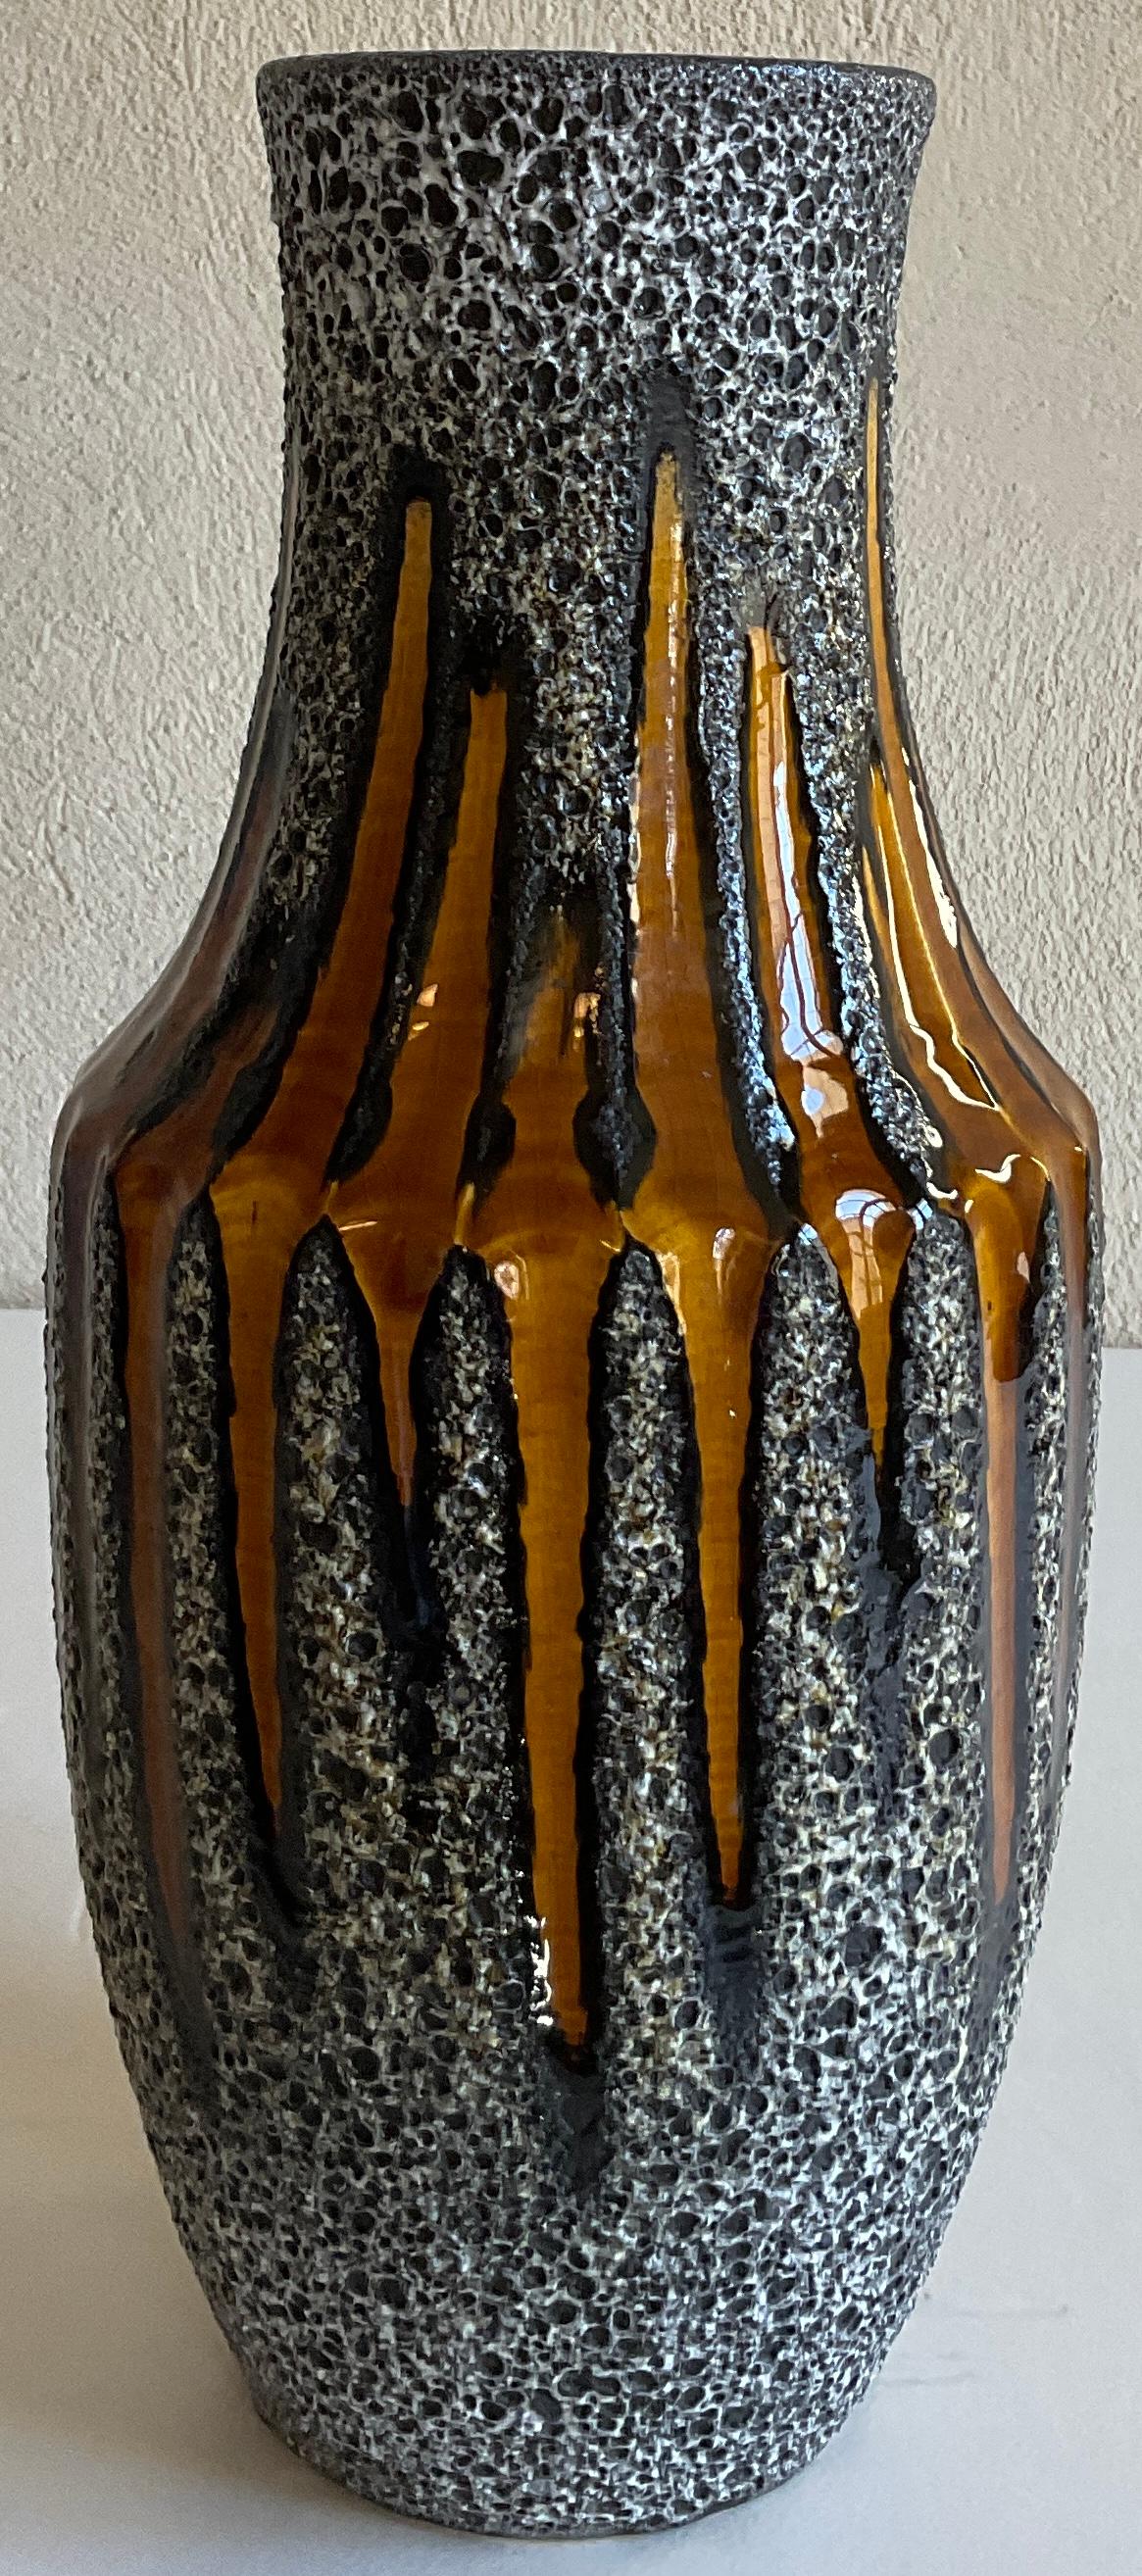 A very collectable mid-century West Germany Studio Pottery Vase. This vintage handled vase features stunning mid-century details and subtle earth tone colors. A great decorative piece with Minimalist and modernist simplicity.
This West Germany